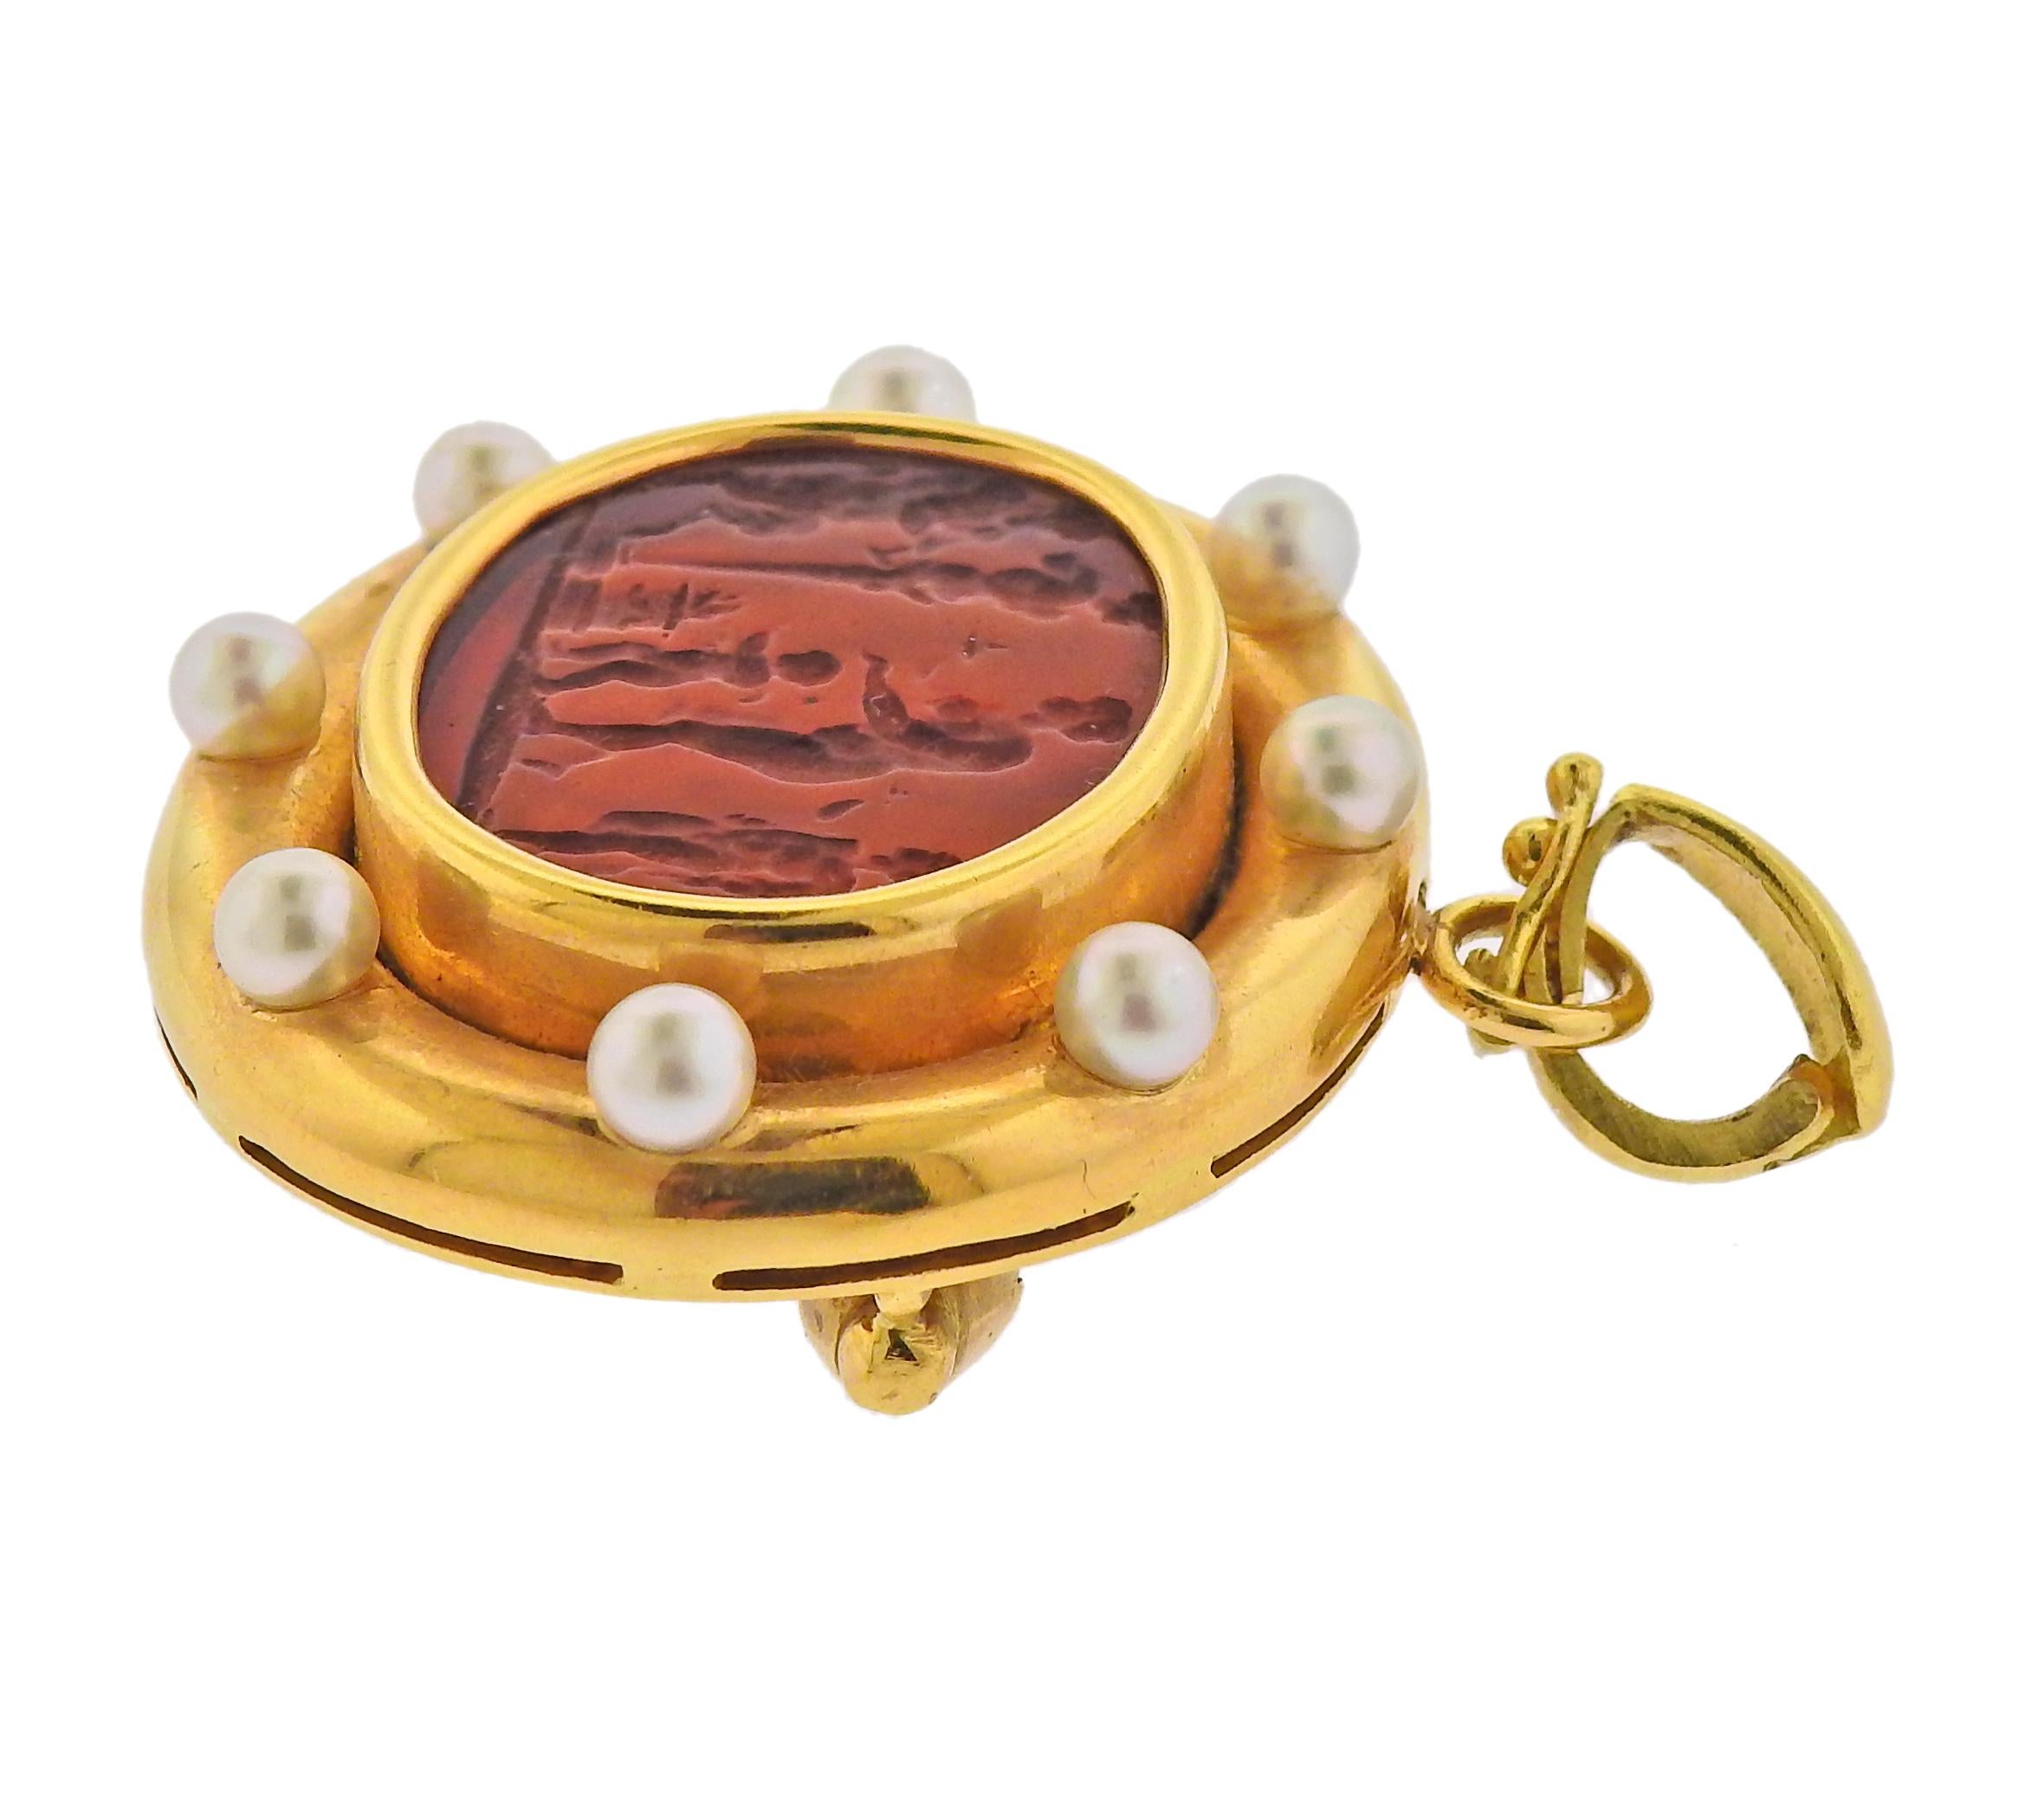 Elizabeth Locke 18k gold pendant brooch, featuring Venetian glass intaglio, backed with mother of pearl, and pearls. Pendant/brooch is 34mm x 38mm.  Weight - 24 grams. Marked: 18k, E mark.